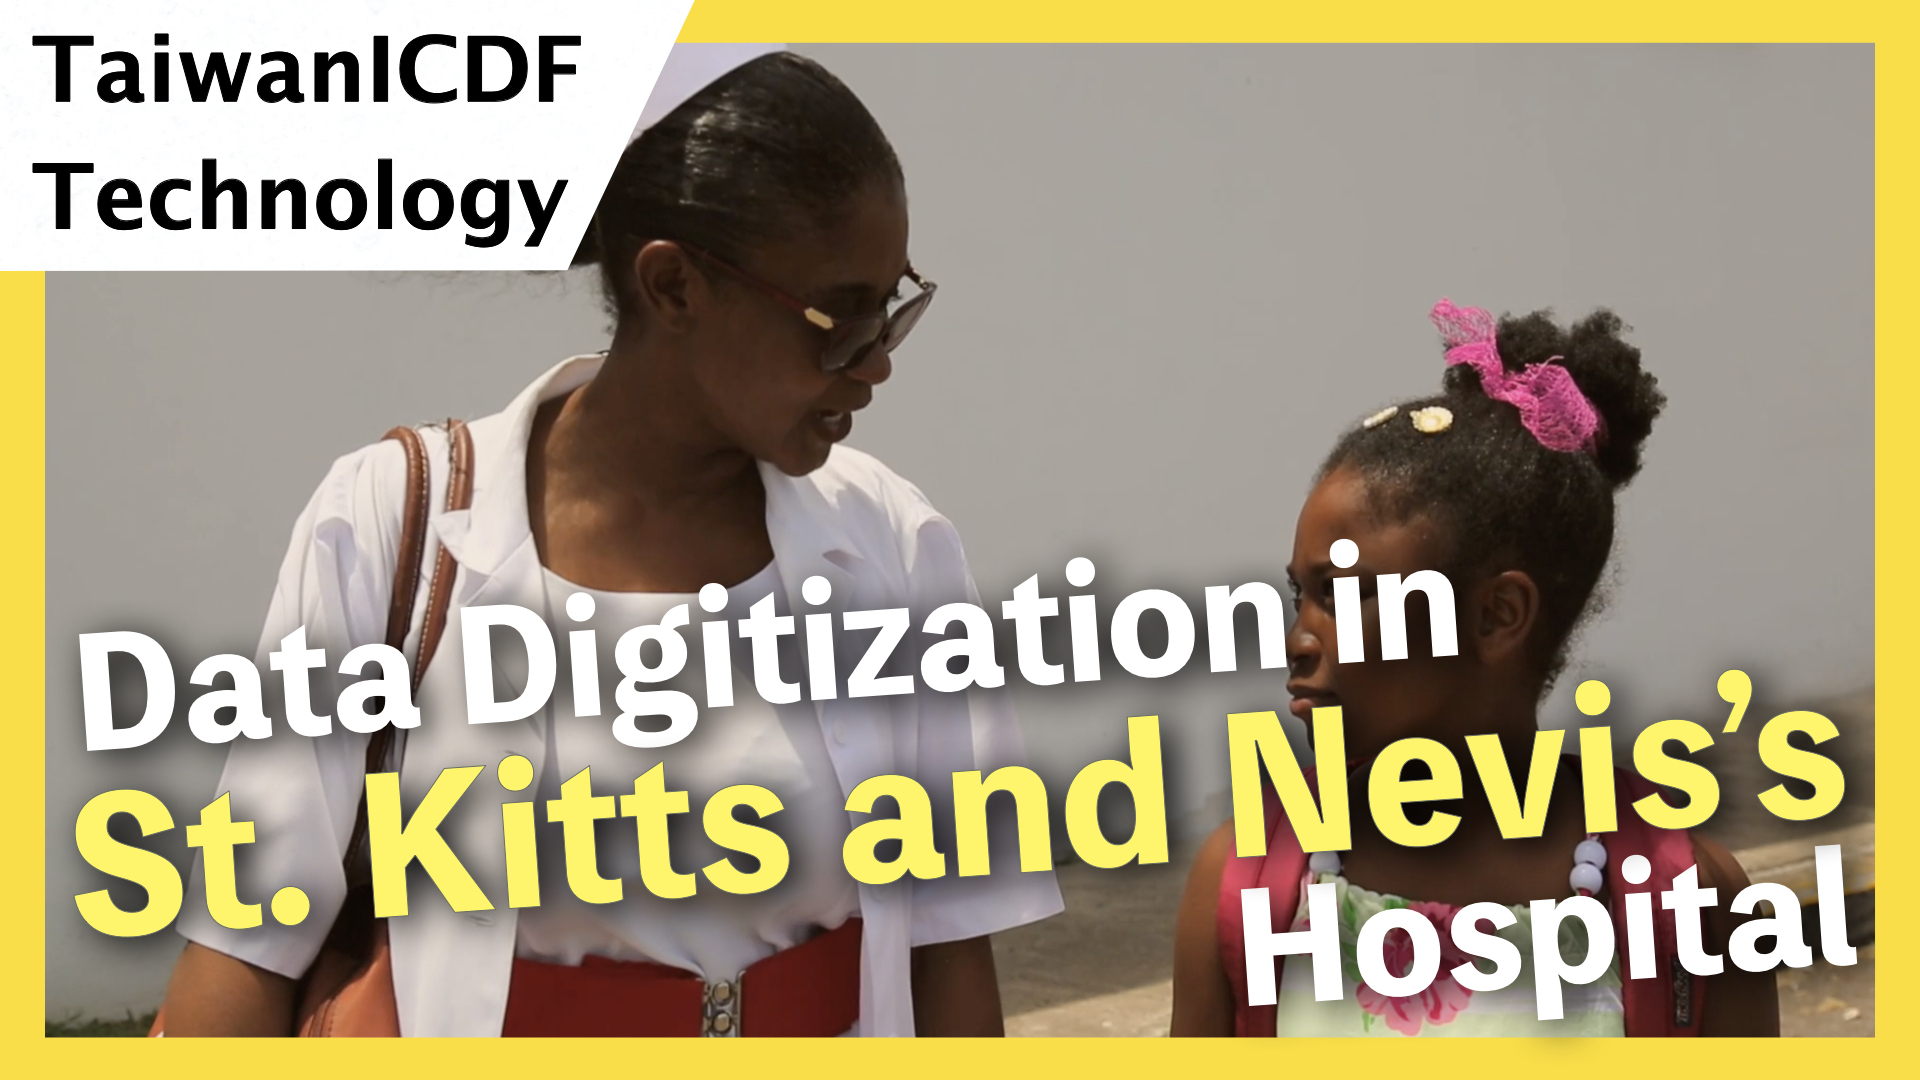 Information and Communication Technology (ICT) Project (St. Kitts and Nevis)